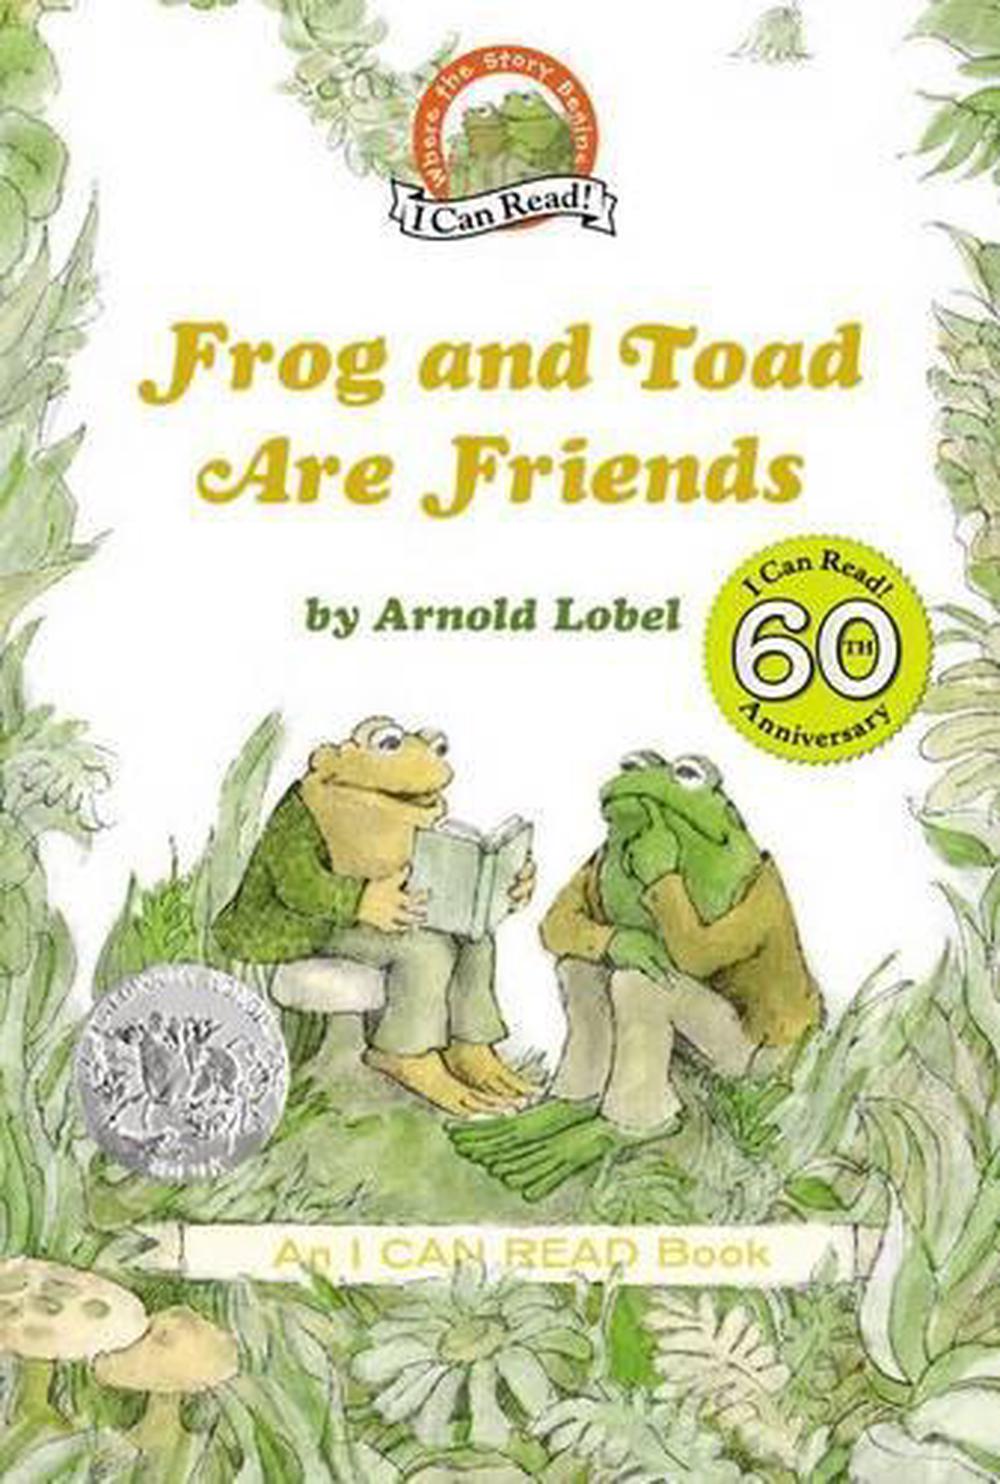 Frog and Toad Are Friends by Arnold Lobel (English) Hardcover Book Free